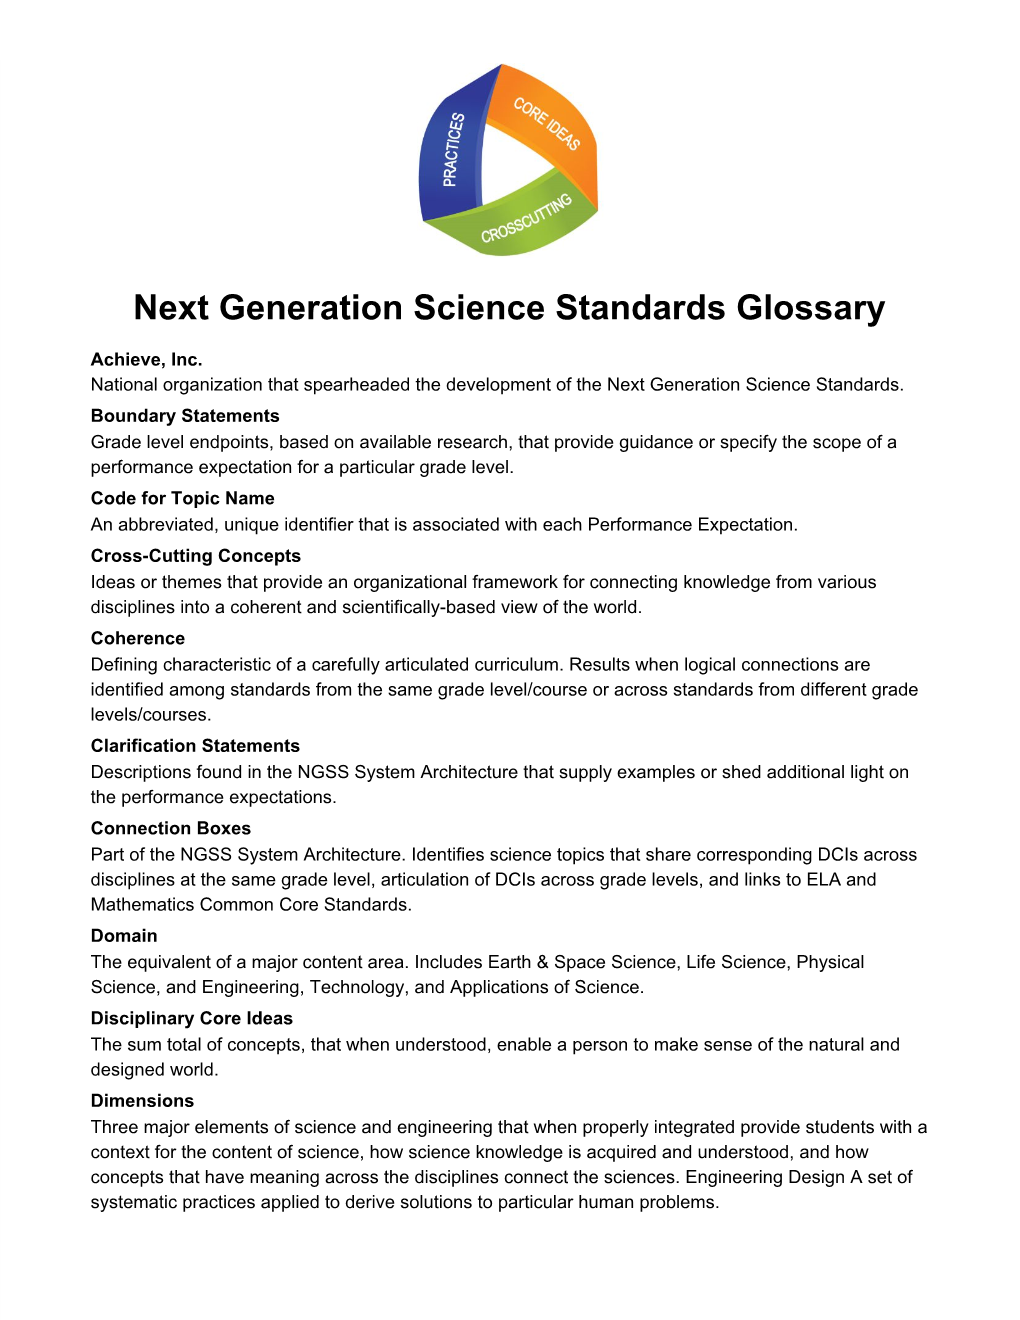 Next Generation Science Standards Glossary